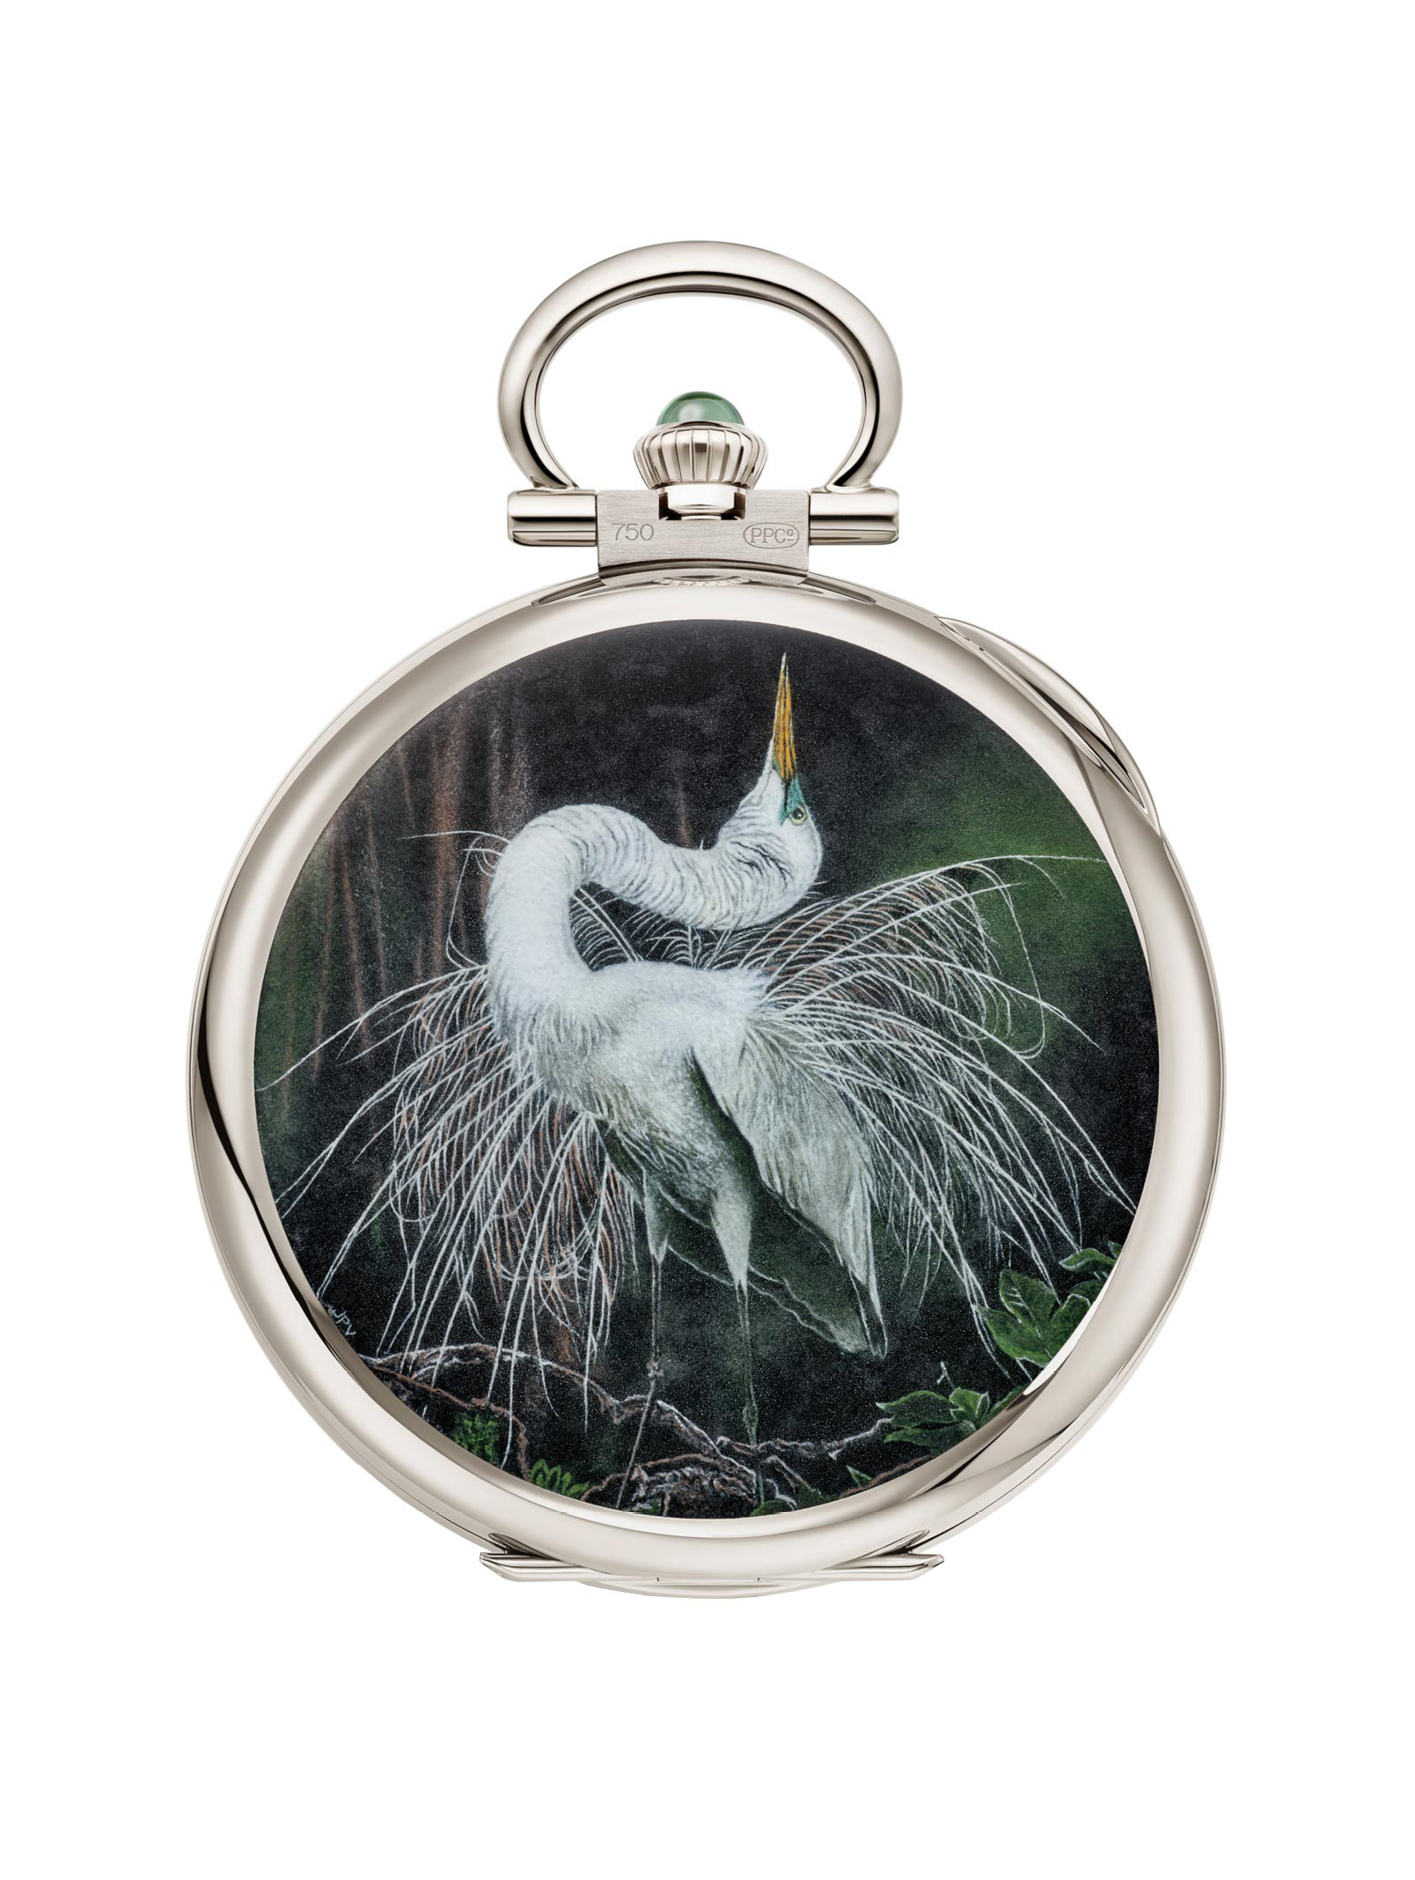 One of the pieces featured in the Rare Handcrafts 2024 collection depicting the elegant white egret in wood marquetry